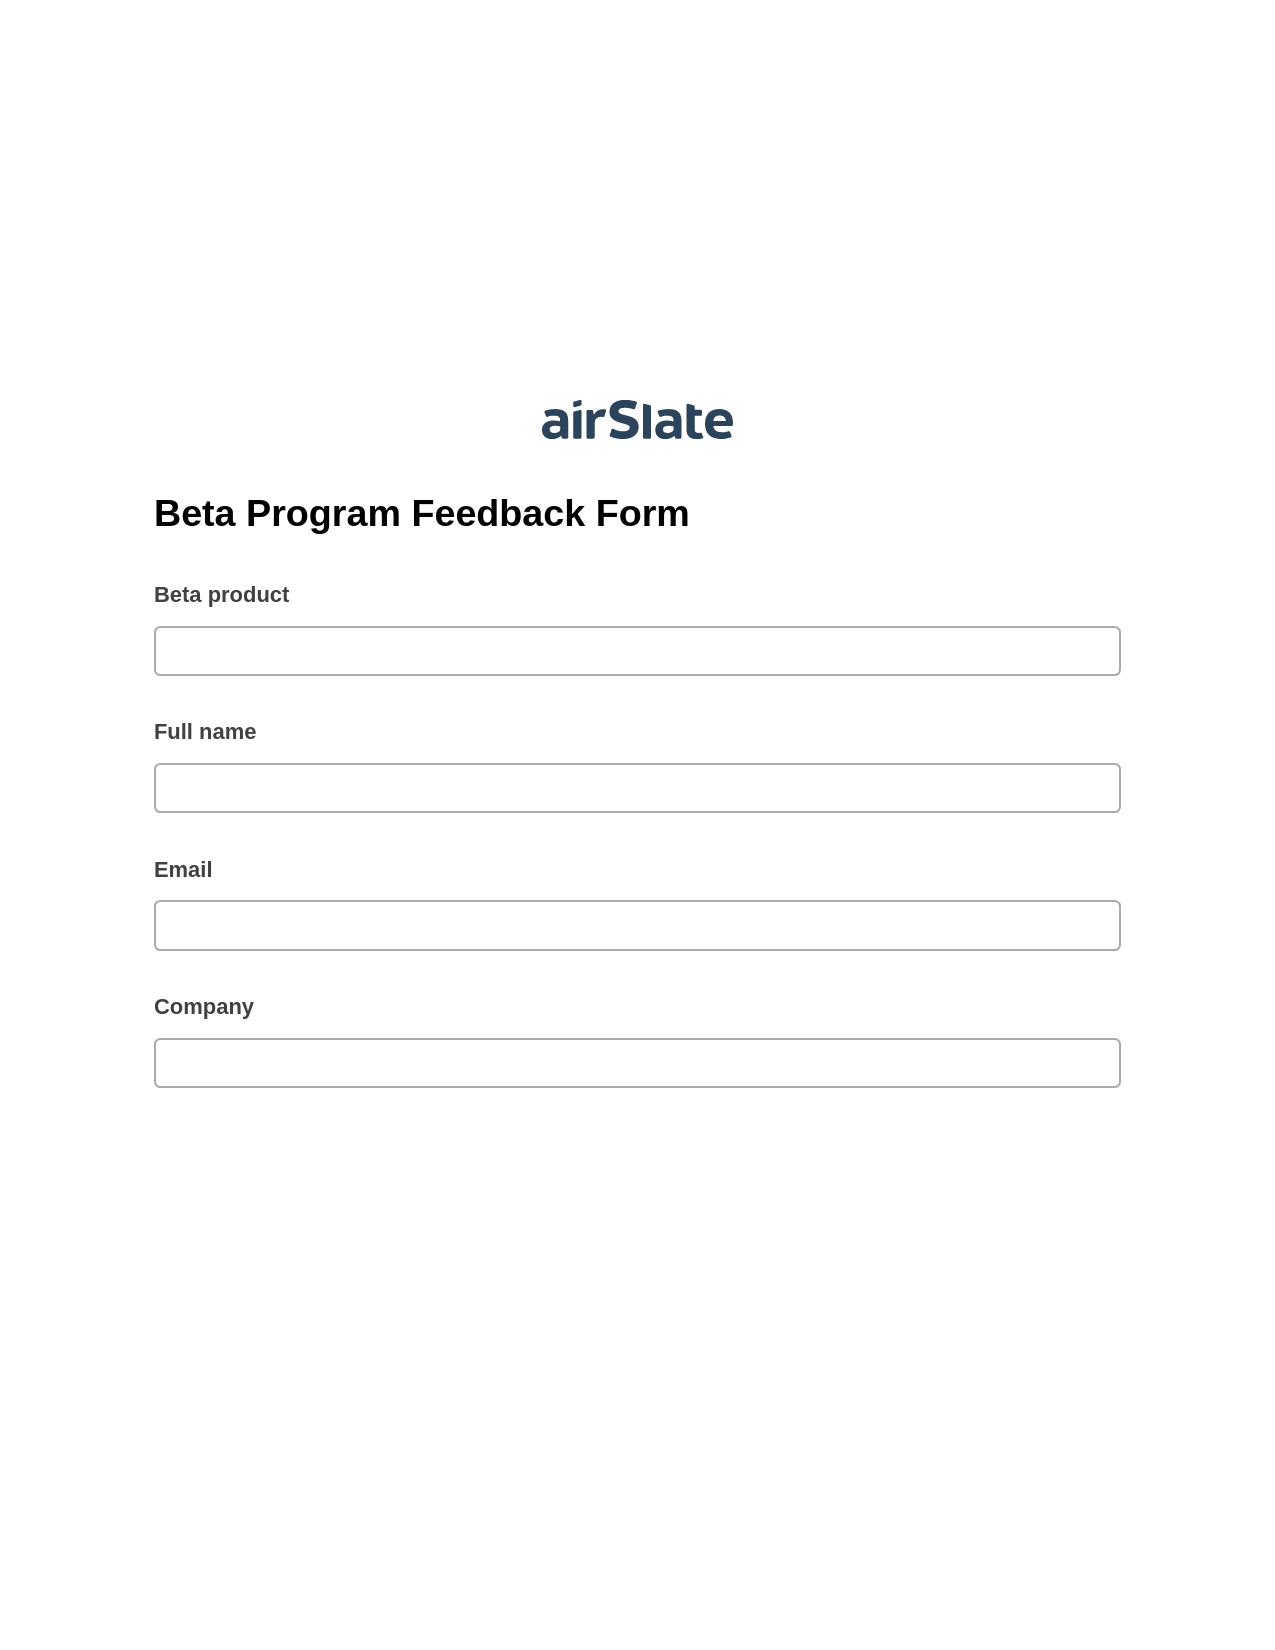 Beta Program Feedback Form Pre-fill from Excel Spreadsheet Bot, Assign Slate Name Bot, Export to Formstack Documents Bot